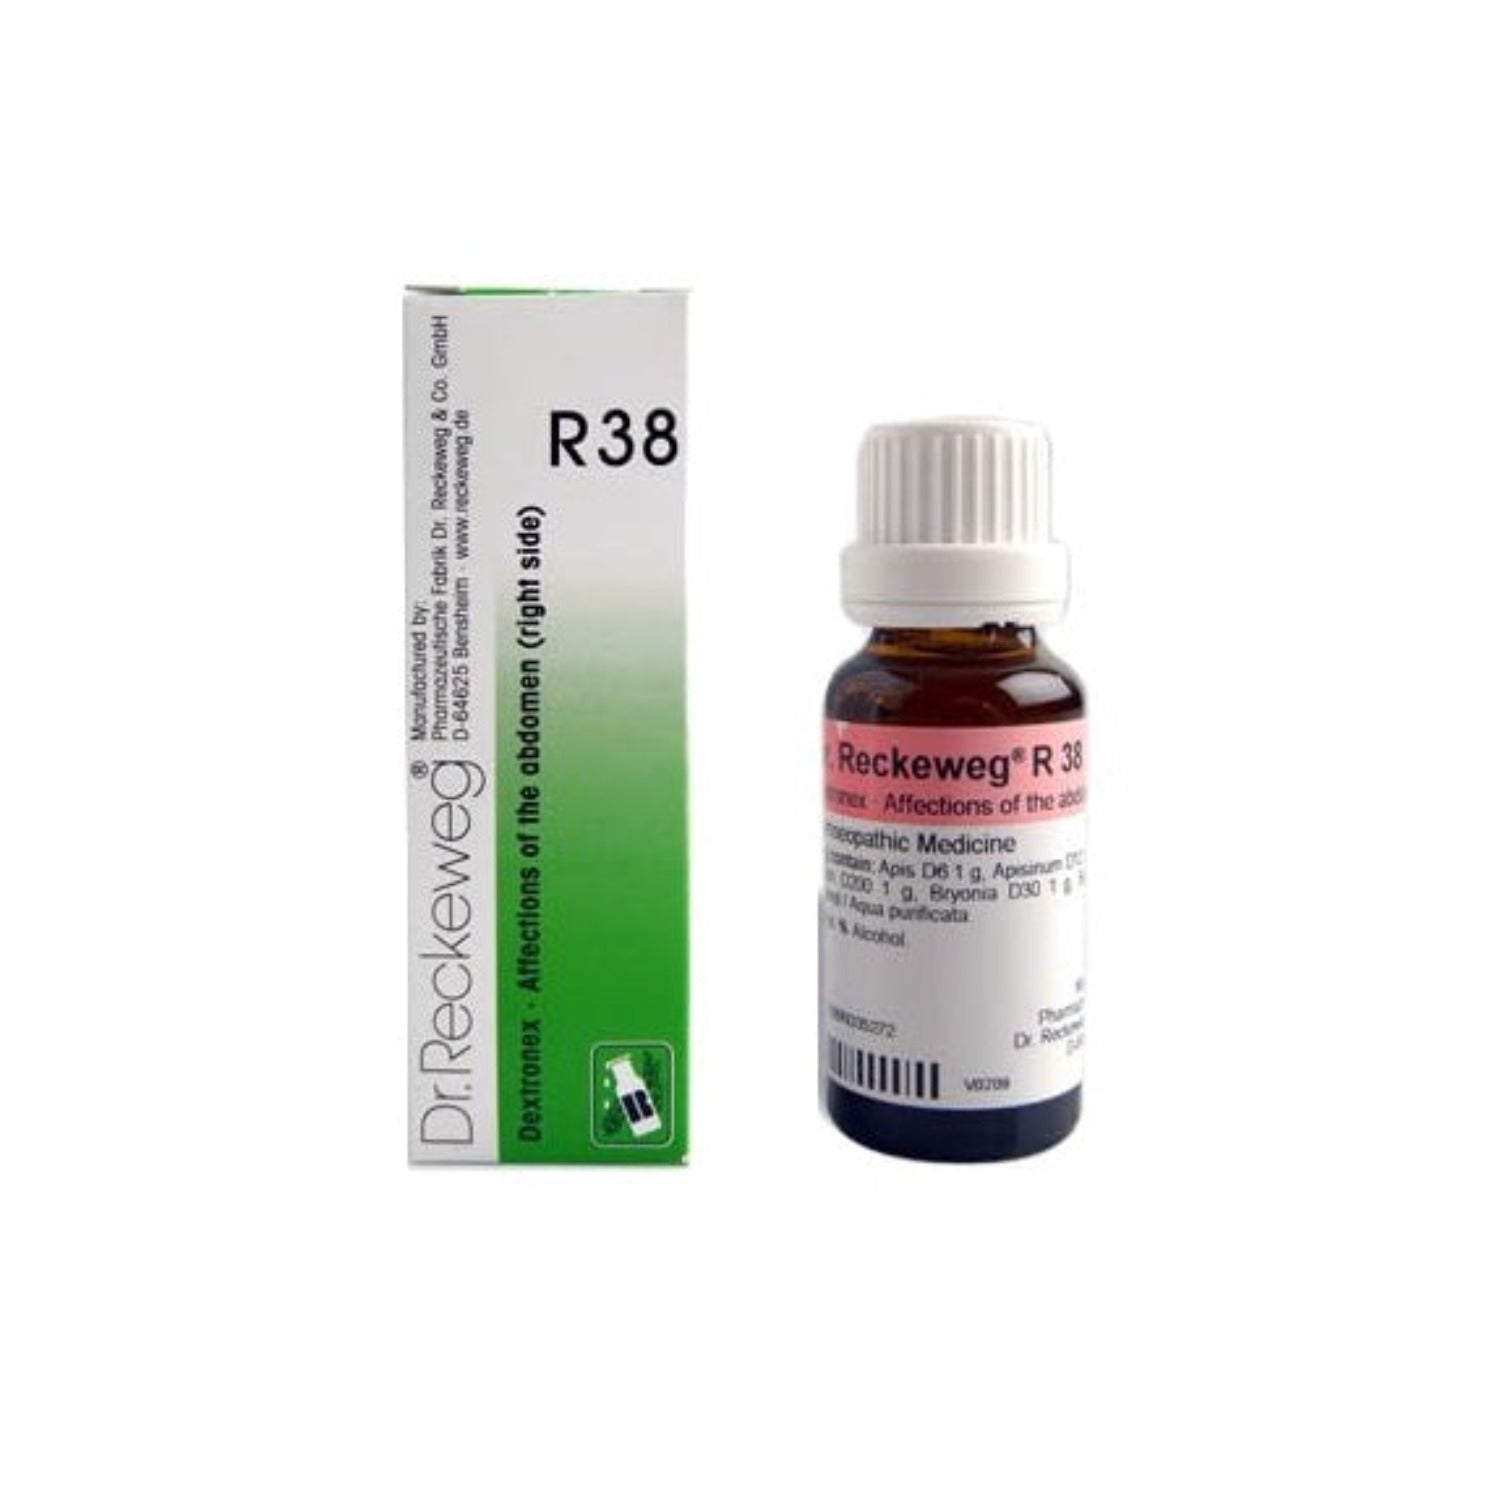 Dr Reckeweg Homoeopathy R38 Affections Of The Abdomen Right Side Drops 22 ml